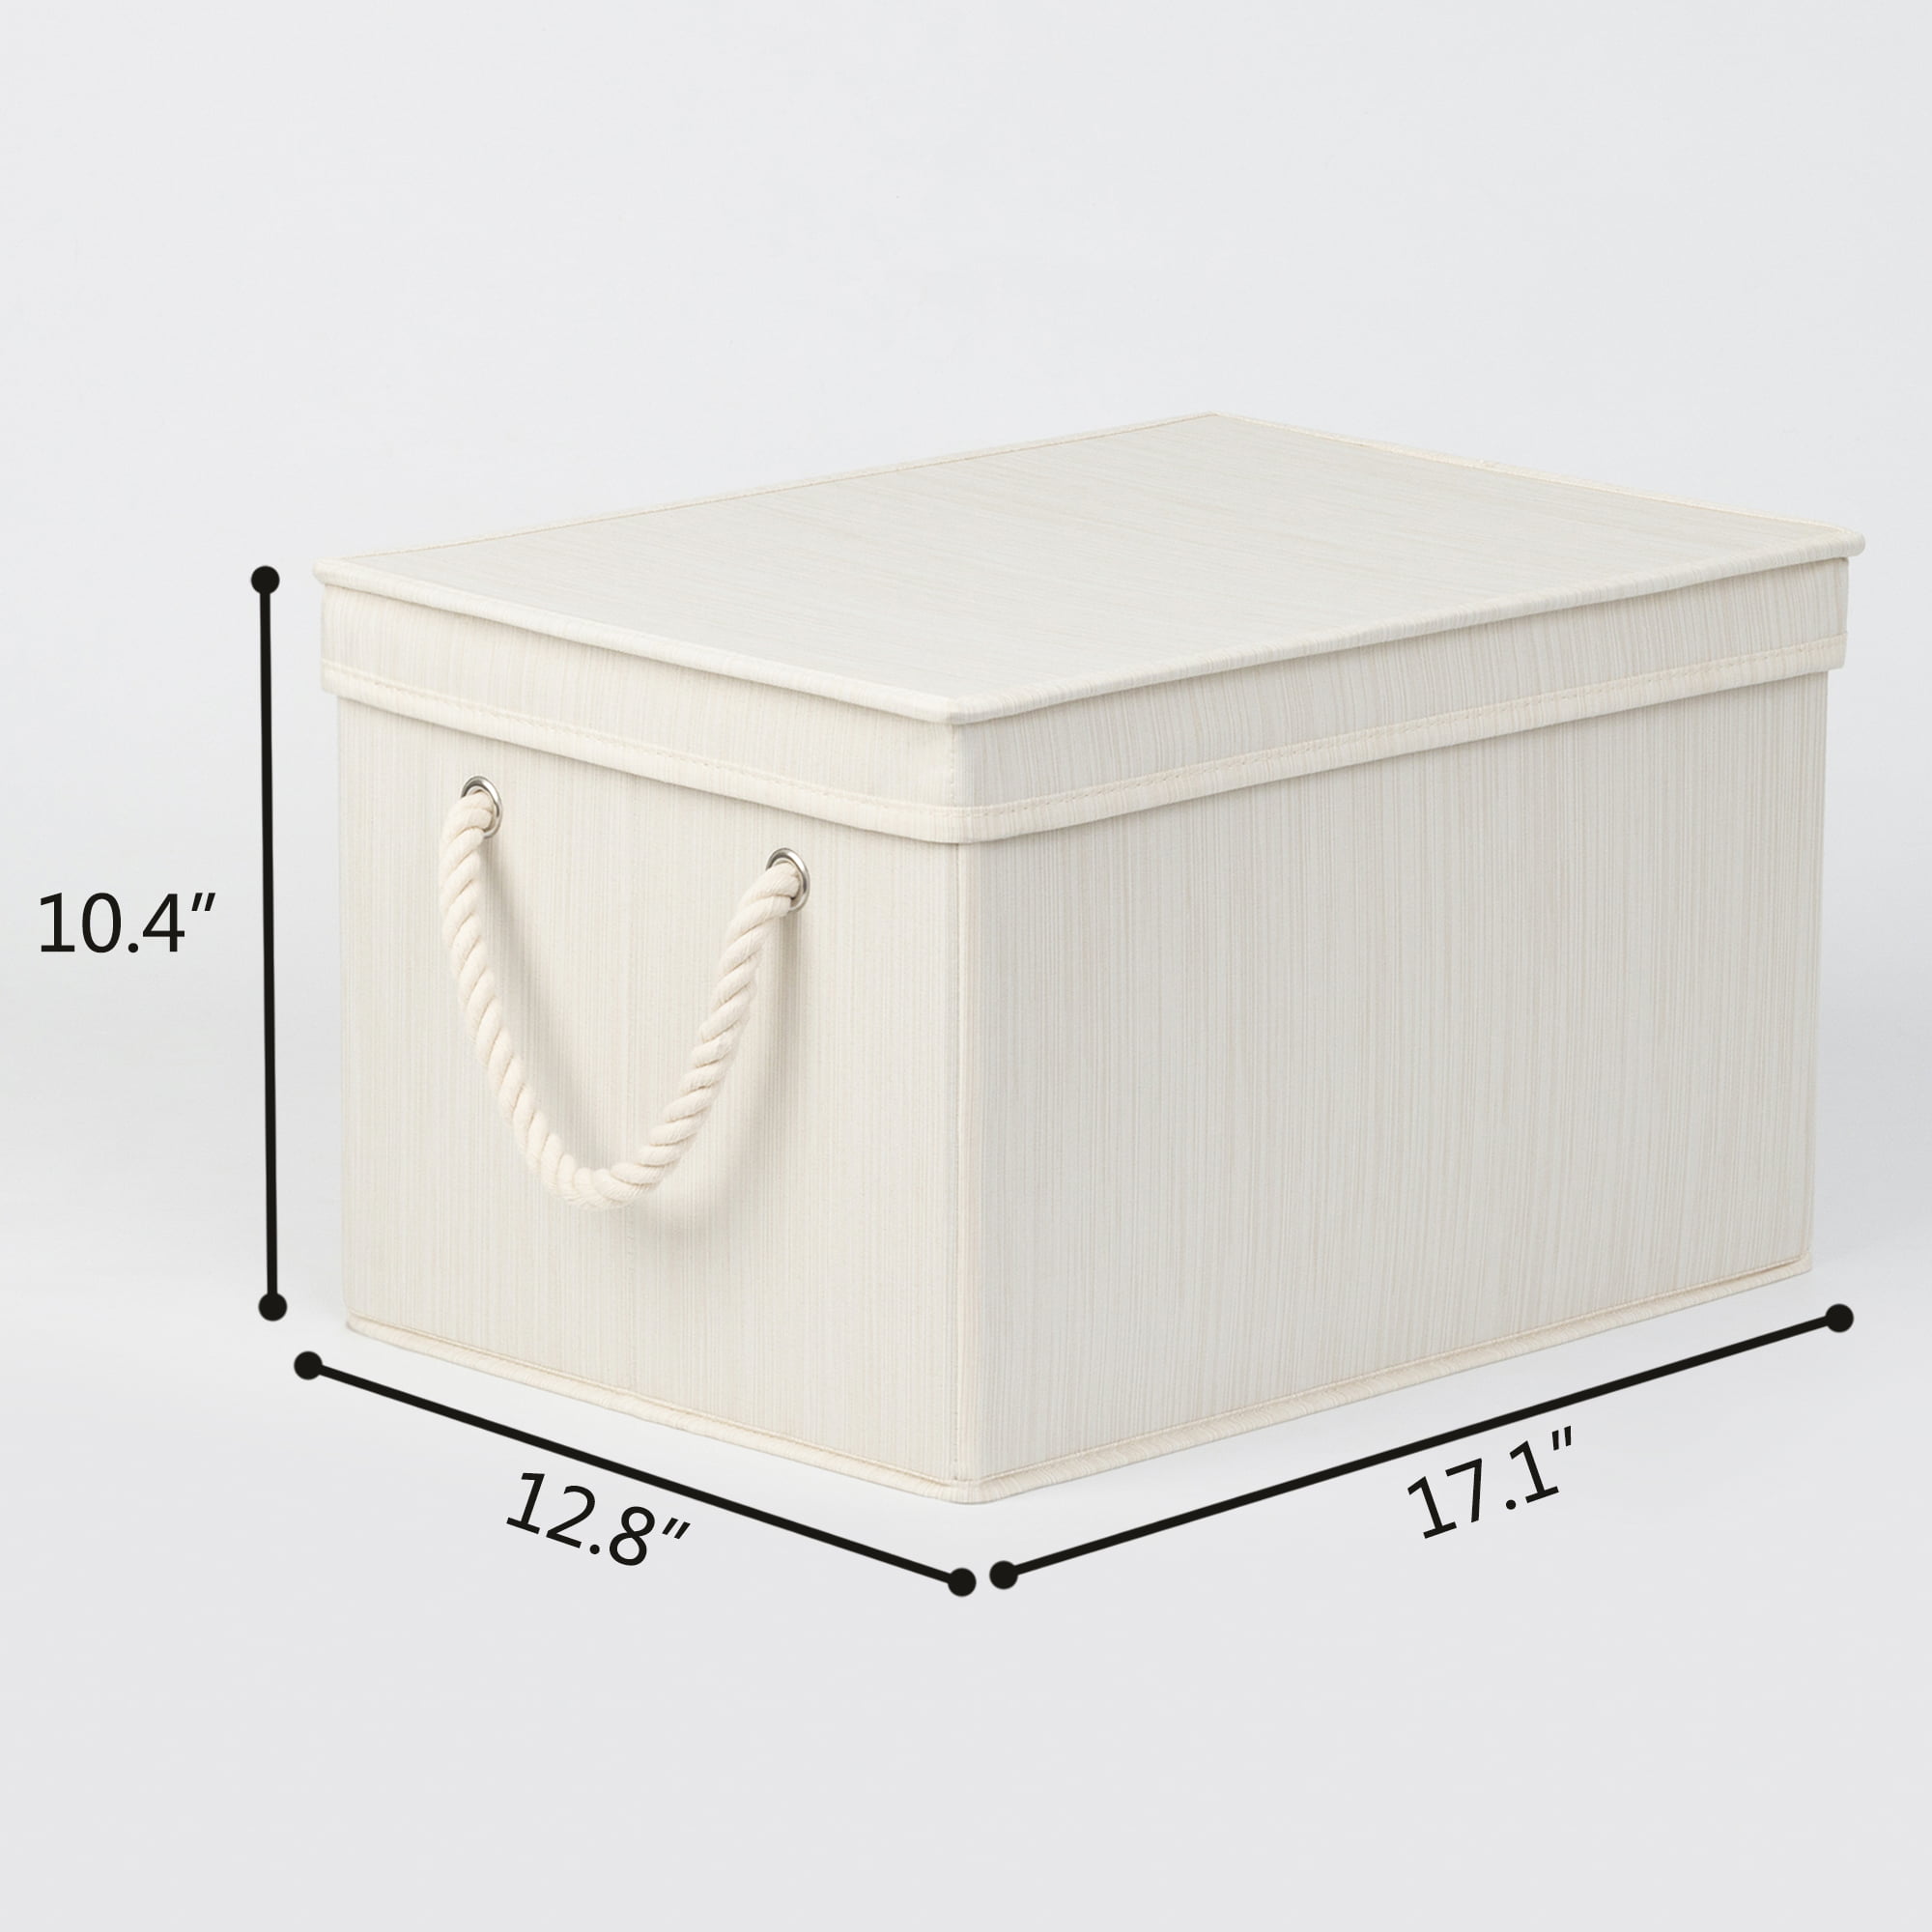 The Twillery Co. Oloran Recycled Plastic Bin with Bamboo Lid Size: 3 H x 16.9 W x 8.4 D